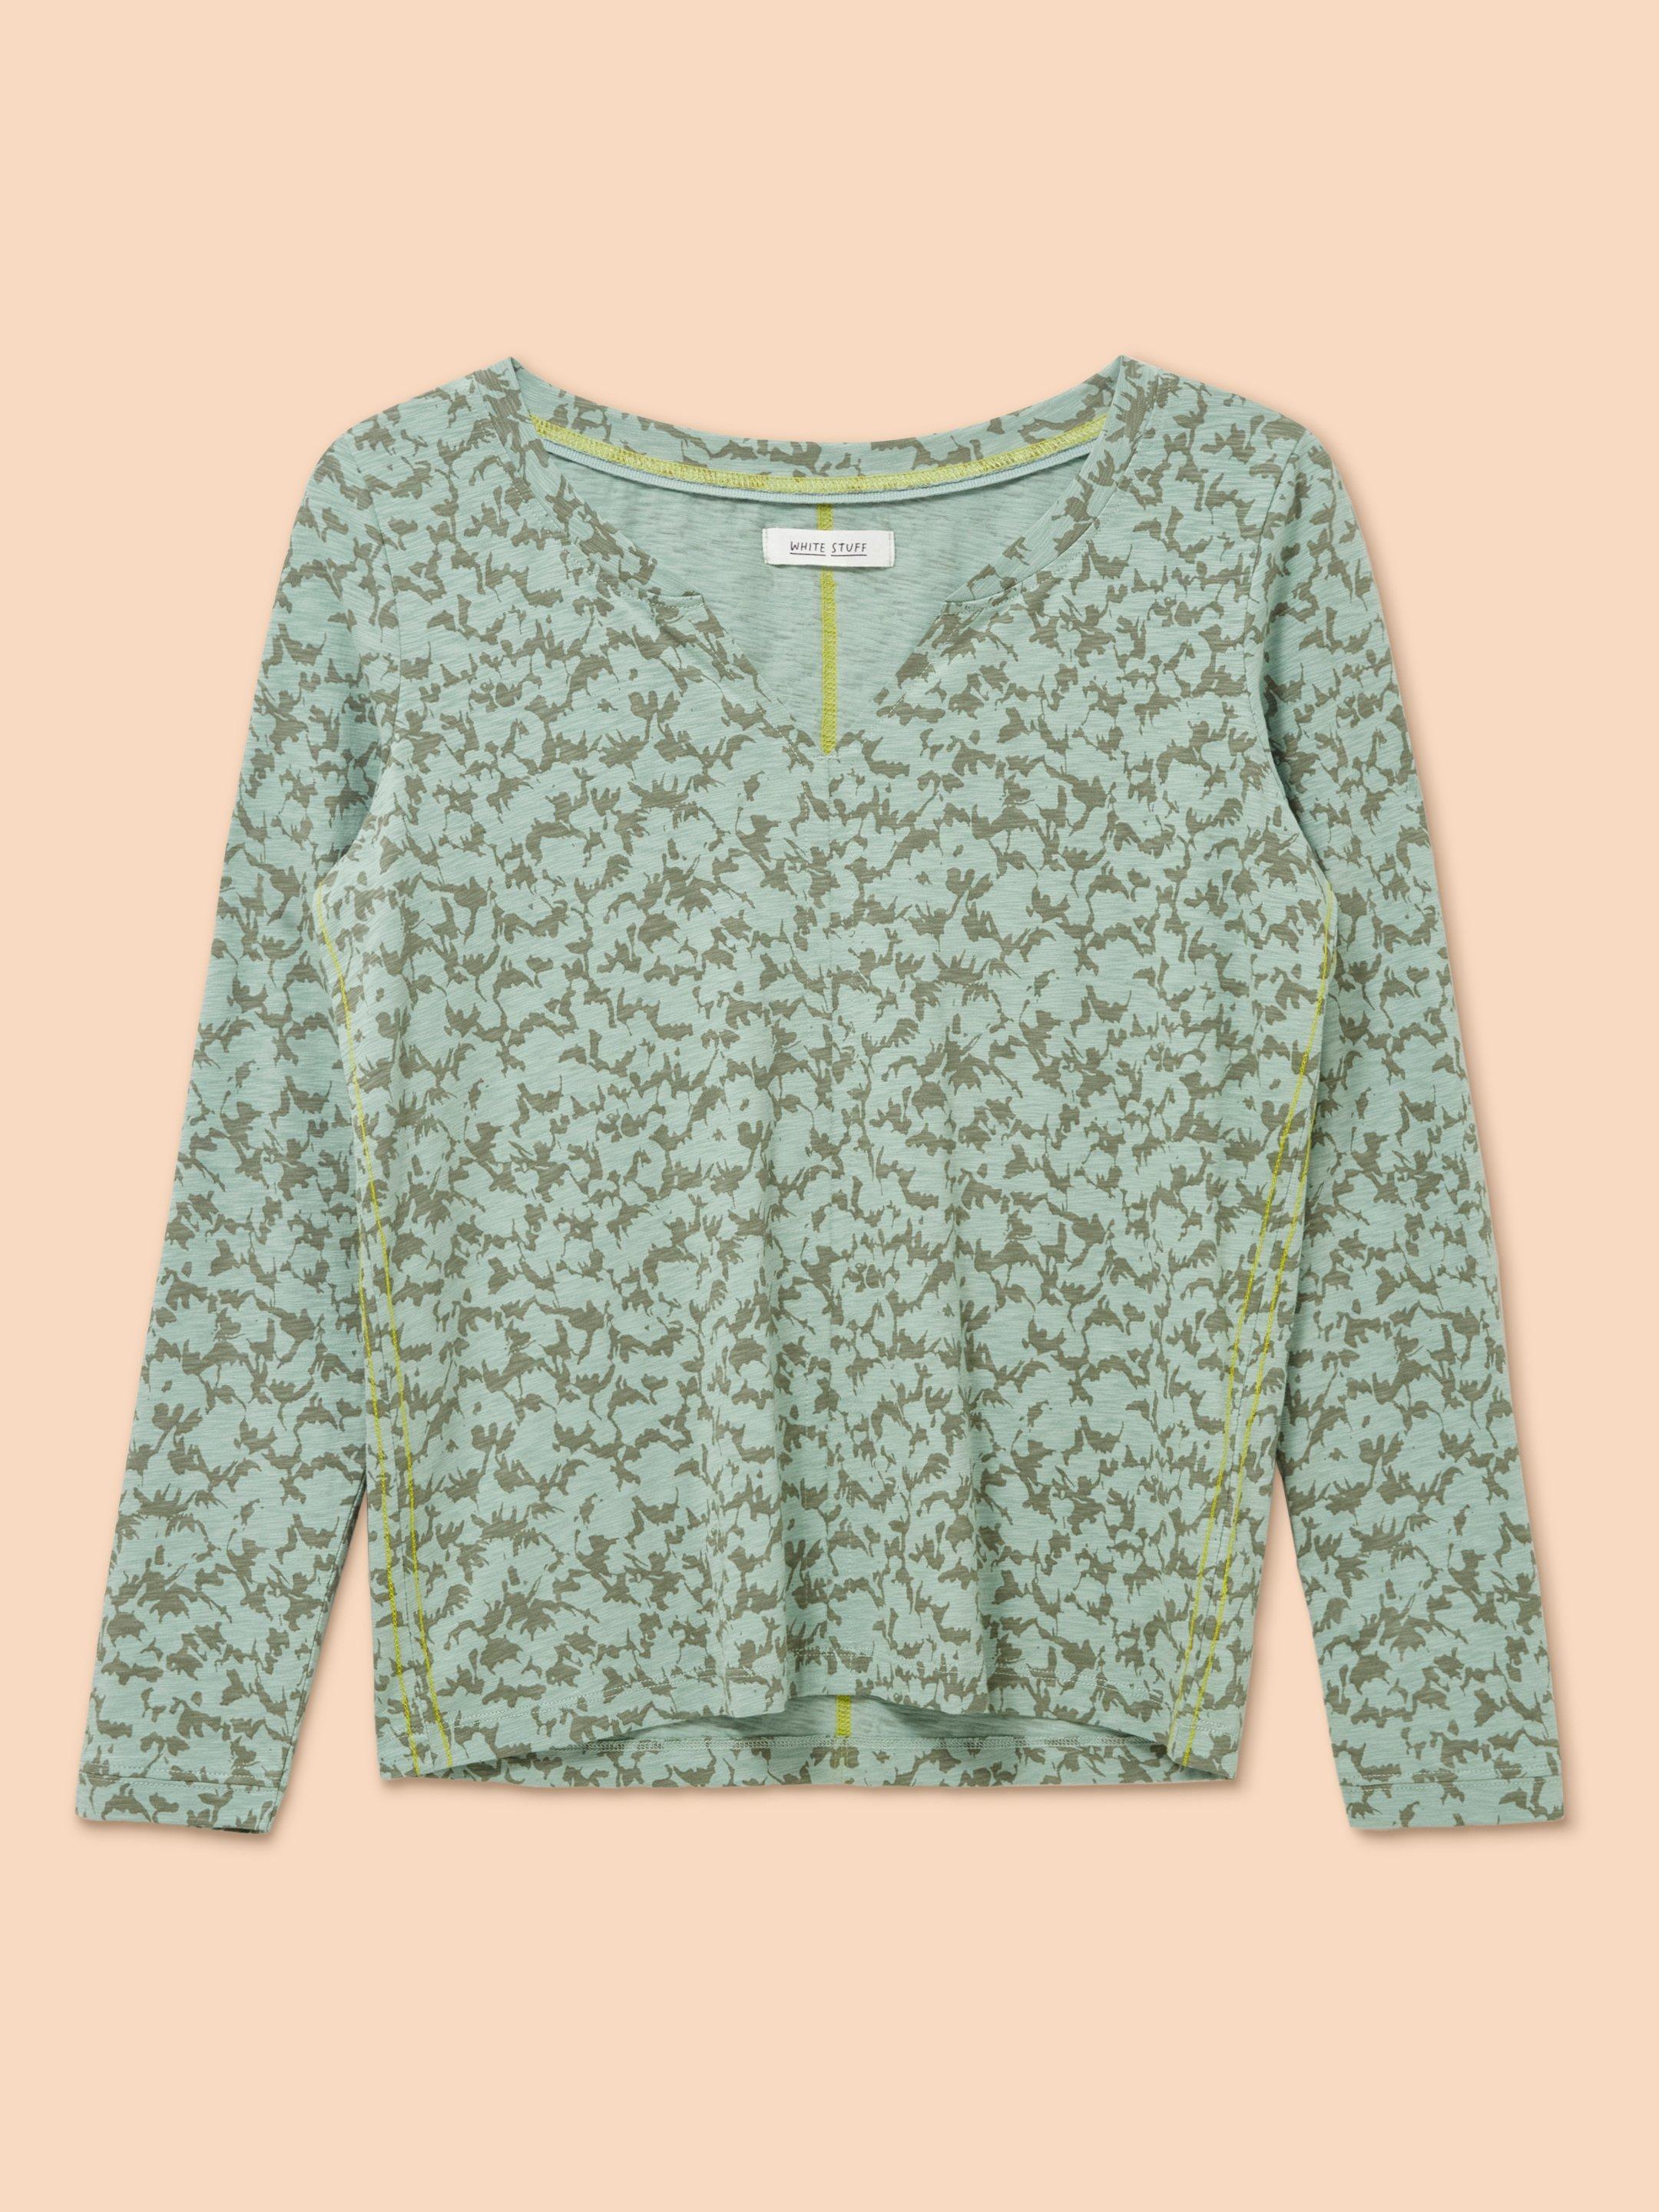 Nelly Long Sleeve T-Shirt in GREEN PR - FLAT FRONT